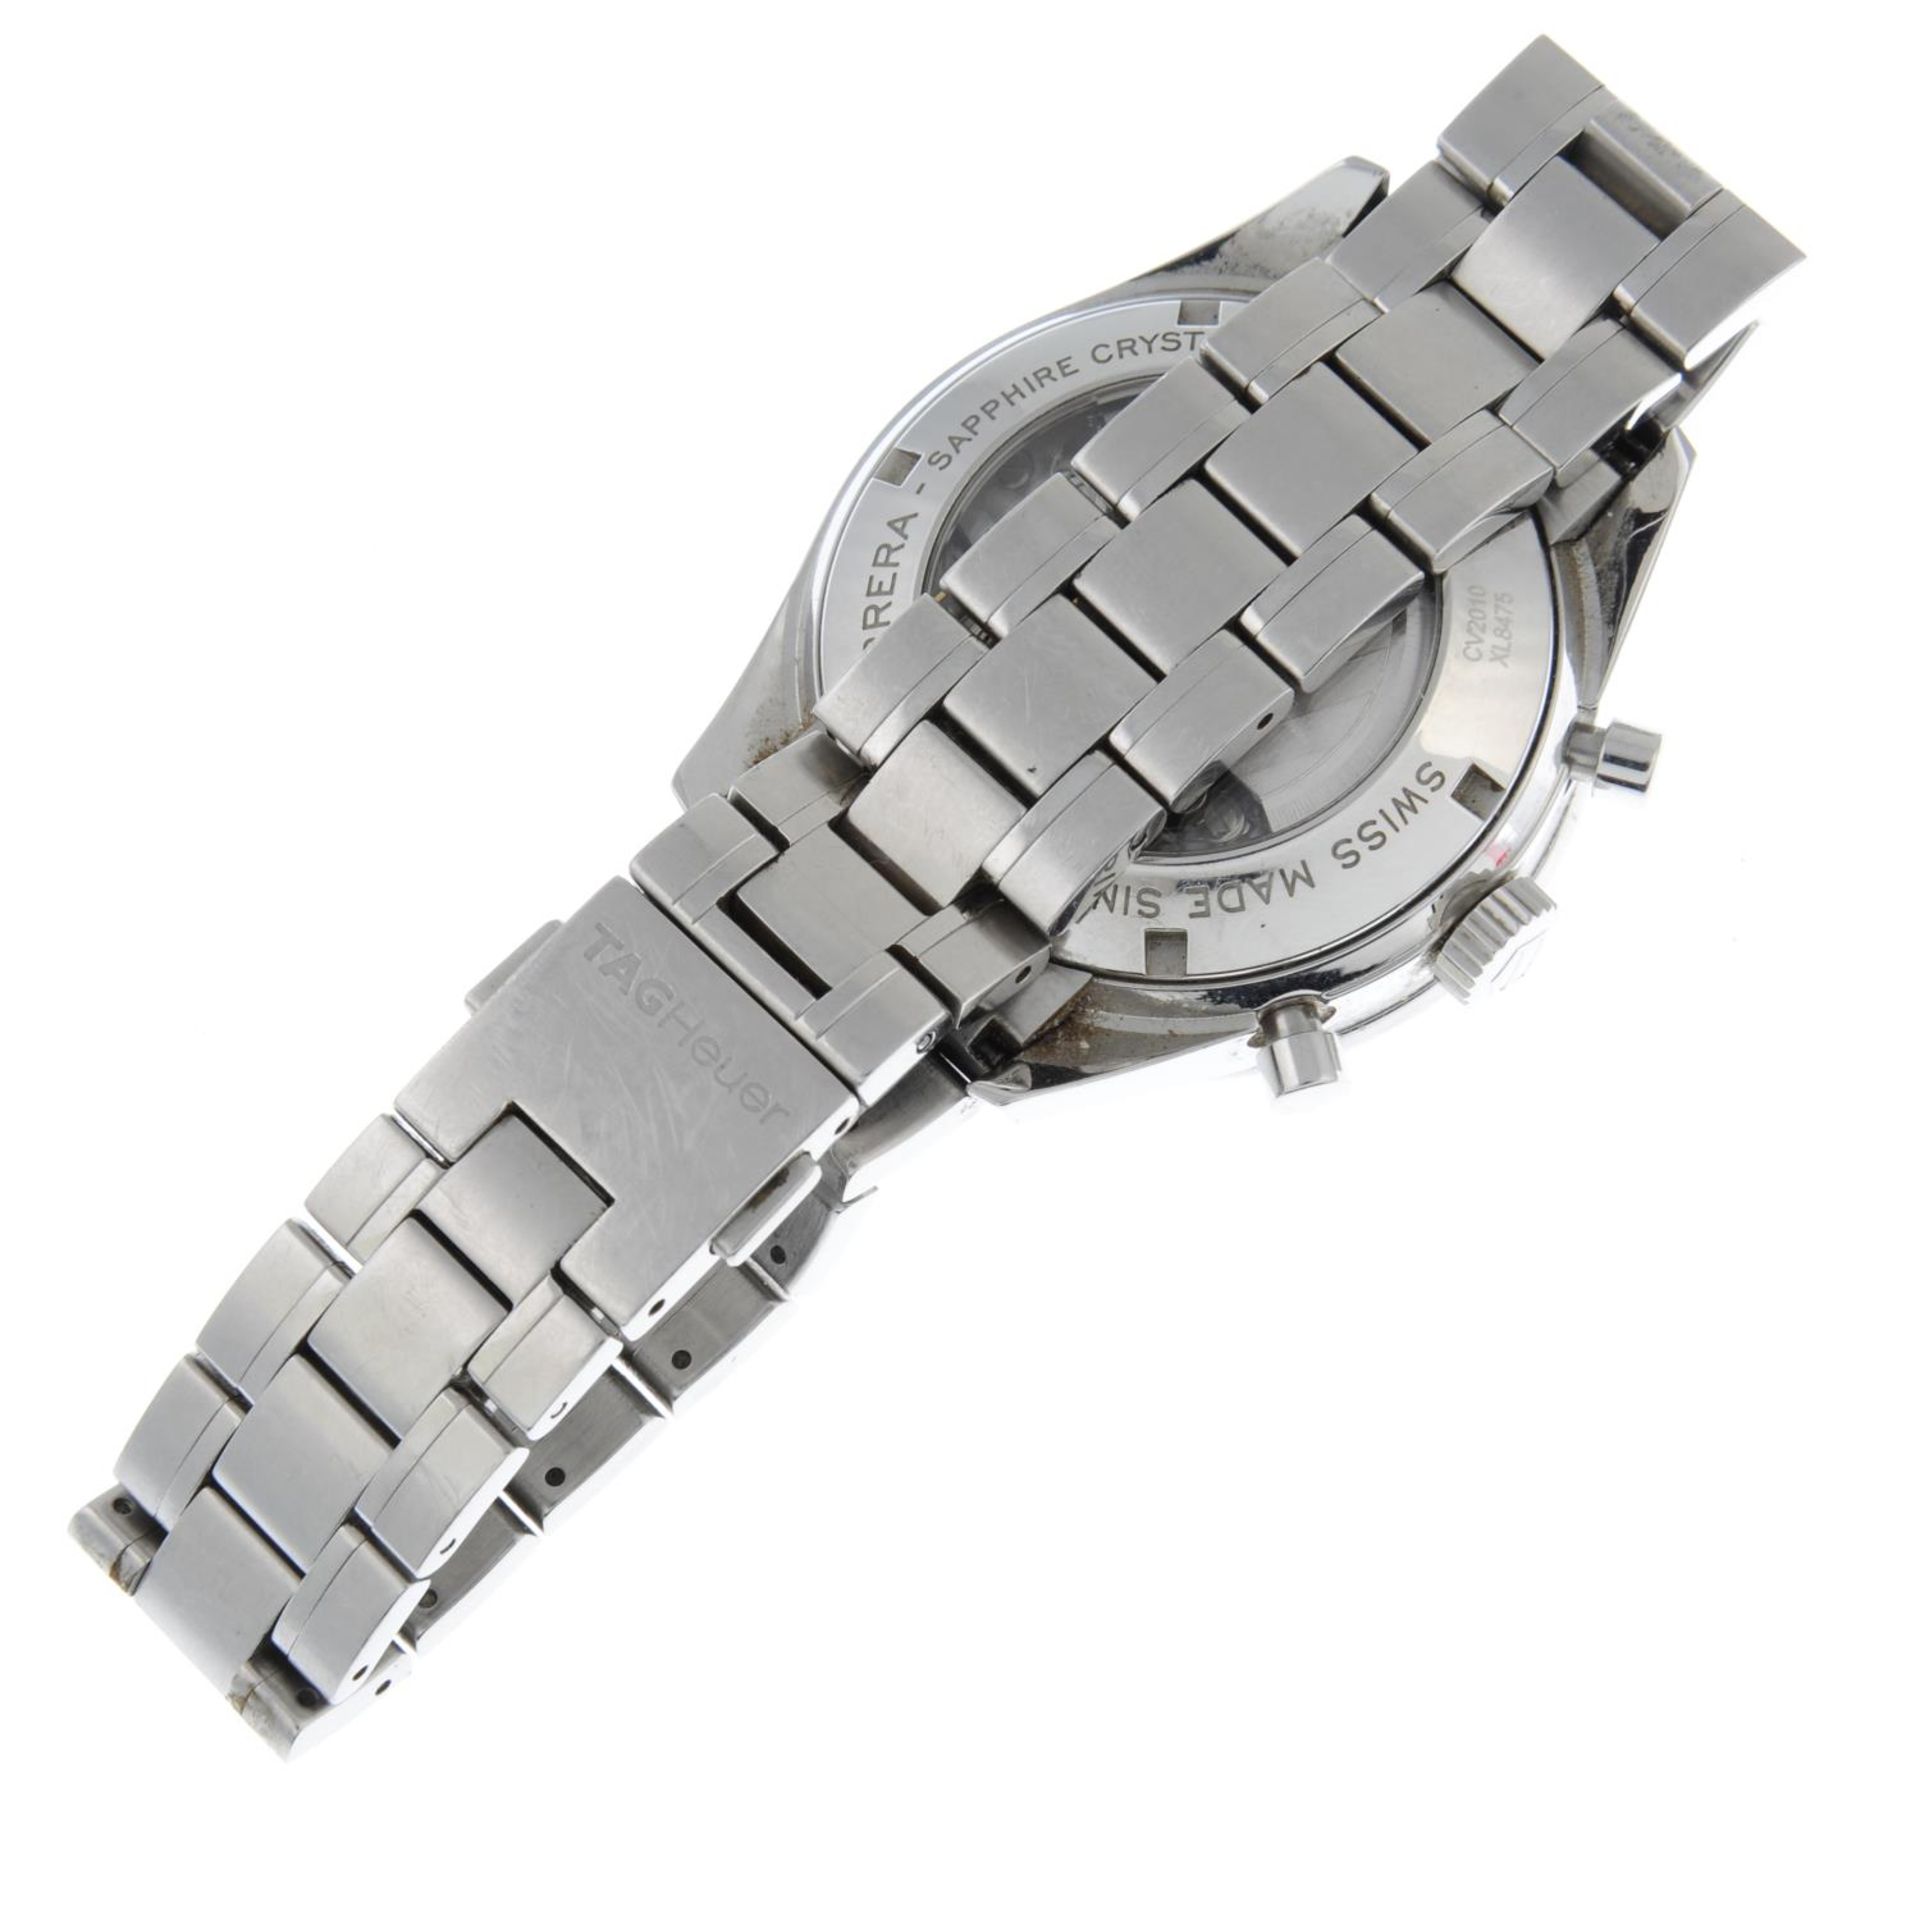 TAG HEUER - a Carrera chronograph bracelet watch. - Image 2 of 6